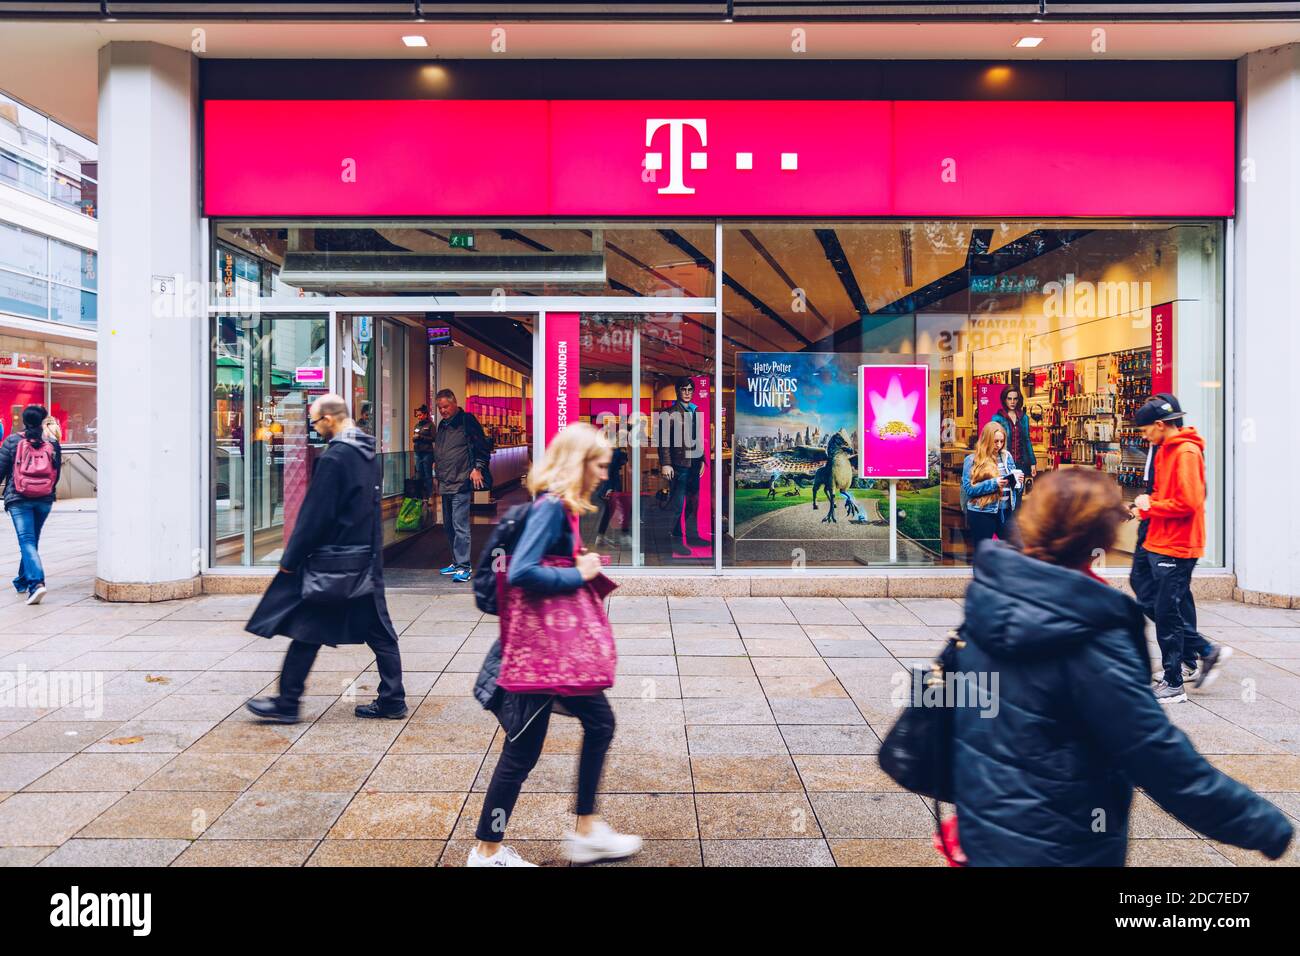 Stuttgart, Germany - October 19, 2019: T-Mobile store with people. T-Mobile is the brand name used by the mobile communications subsidiaries of the Ge Stock Photo